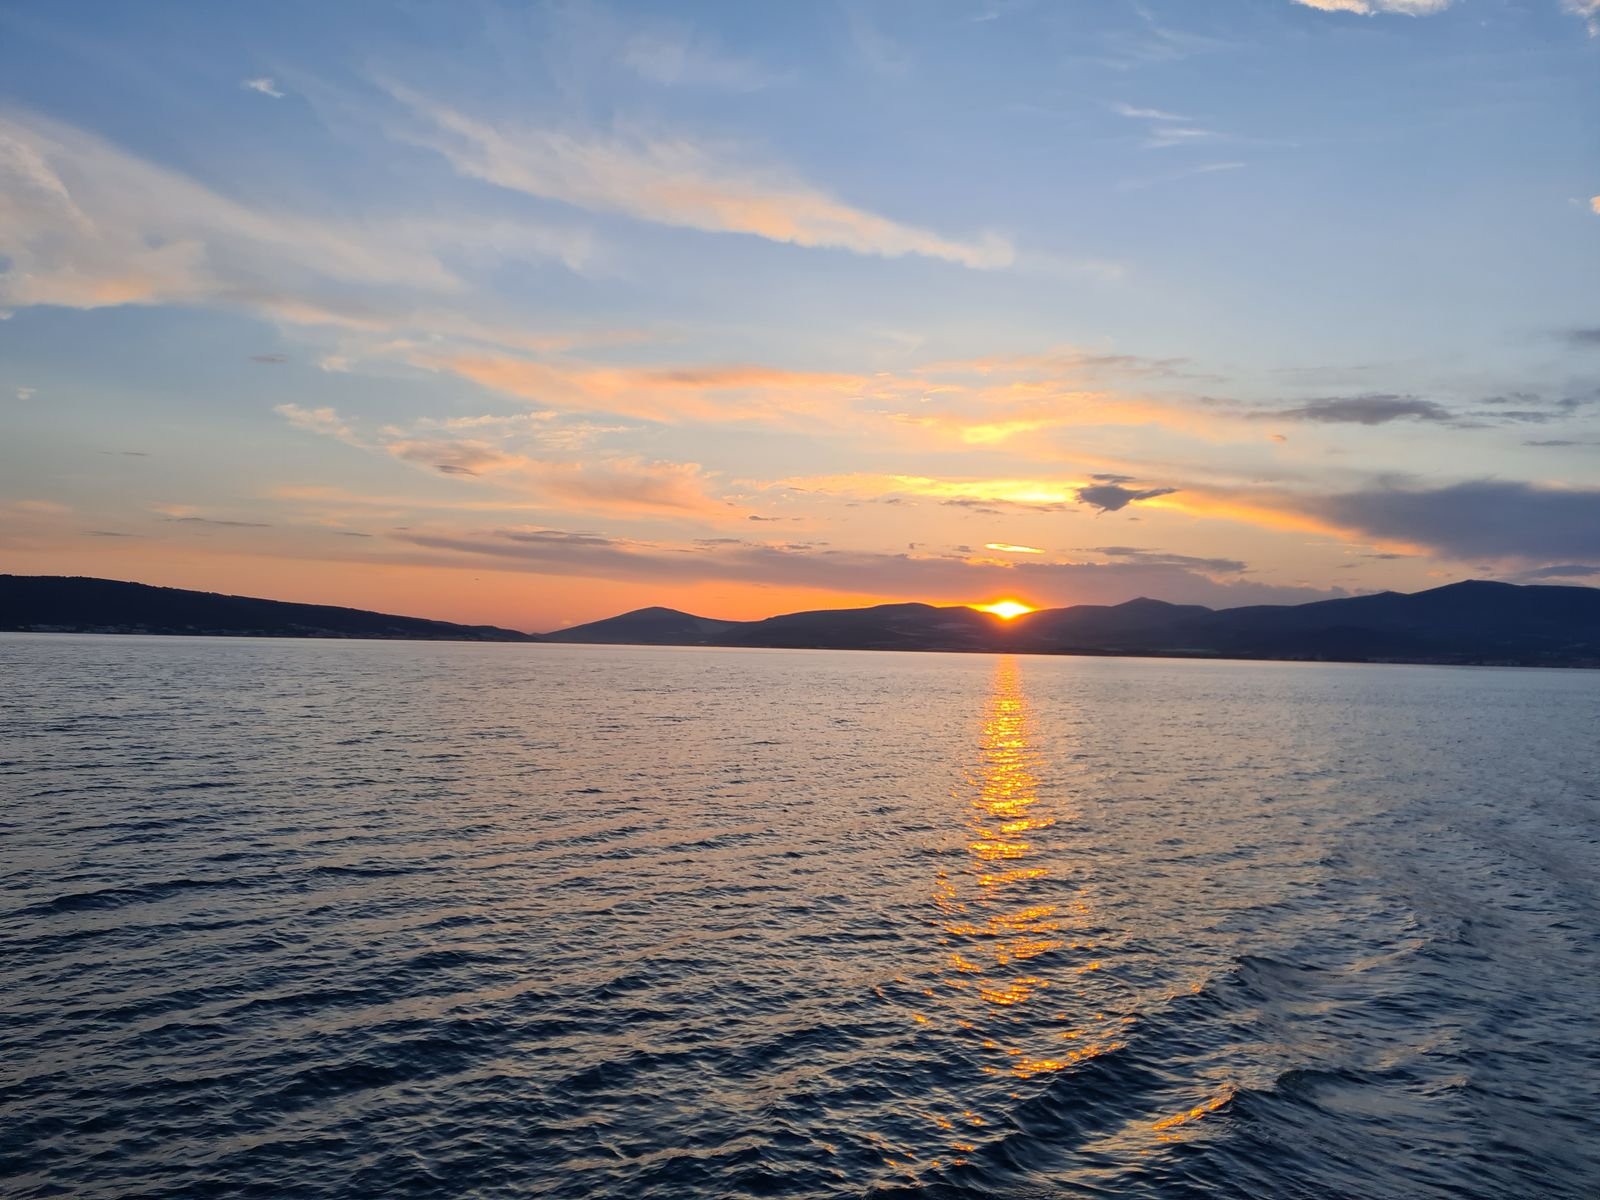 the sun disappearing behind mountains in the distance, taken from the water on a boat on the sea